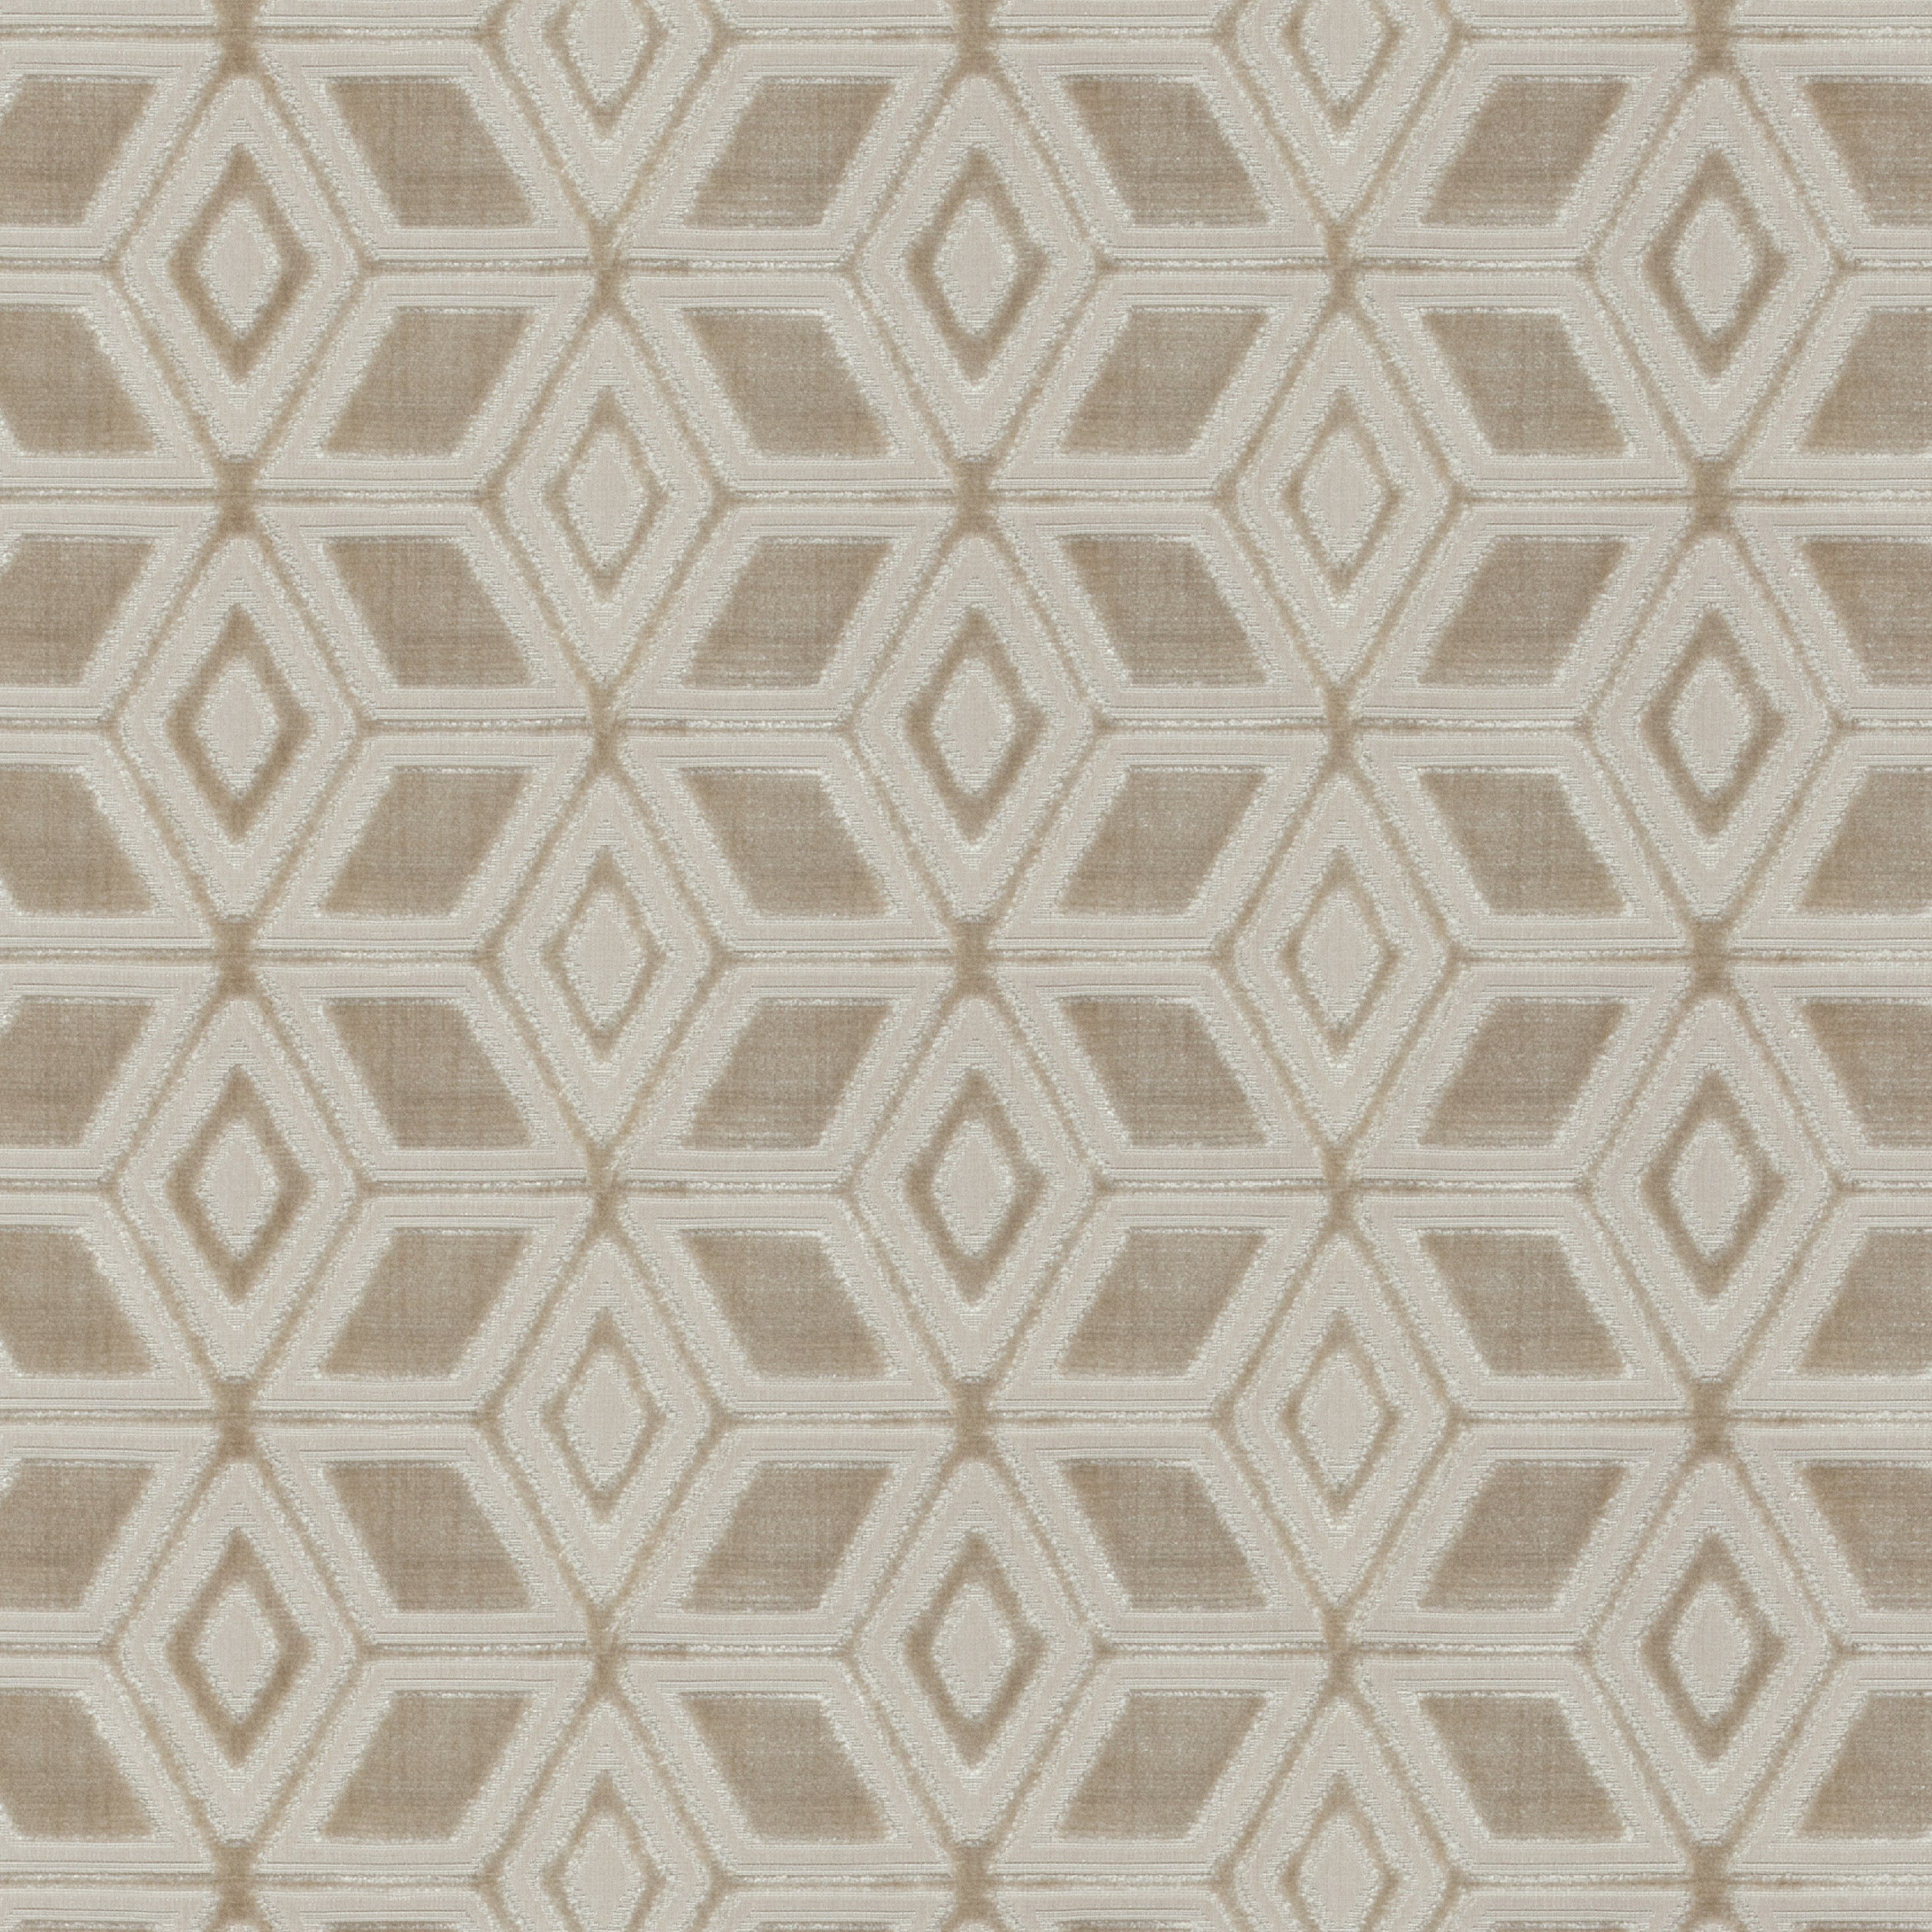 Jardin Maze fabric in cream color - pattern number AW72987 - by Anna French in the Manor collection